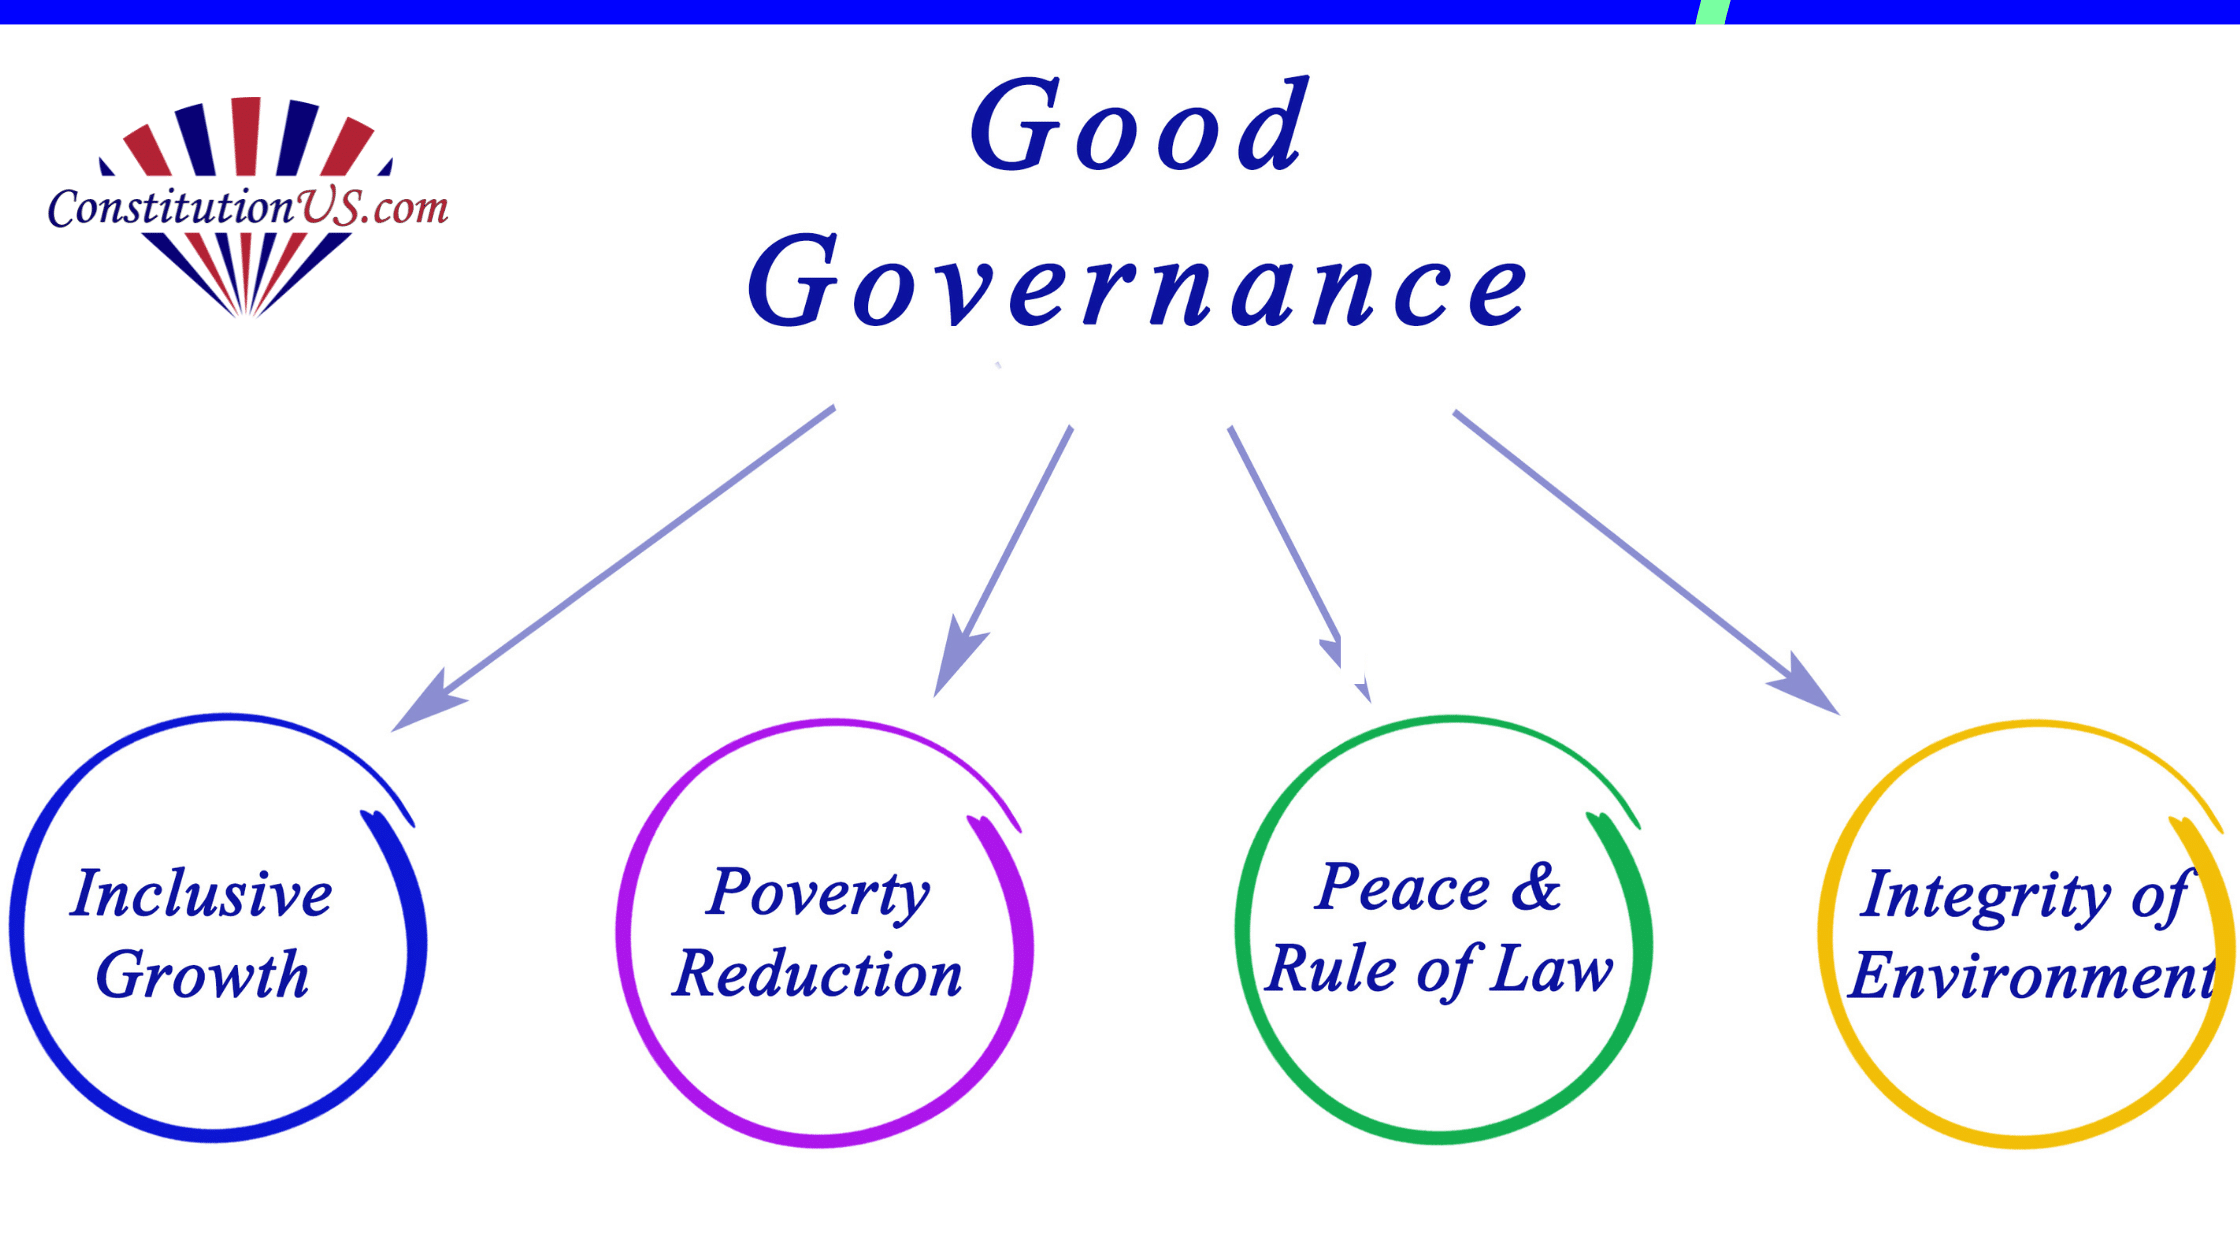 A successful government will have different branches which will ensure fairness and checks and balances. The constitution was written to bring that about.